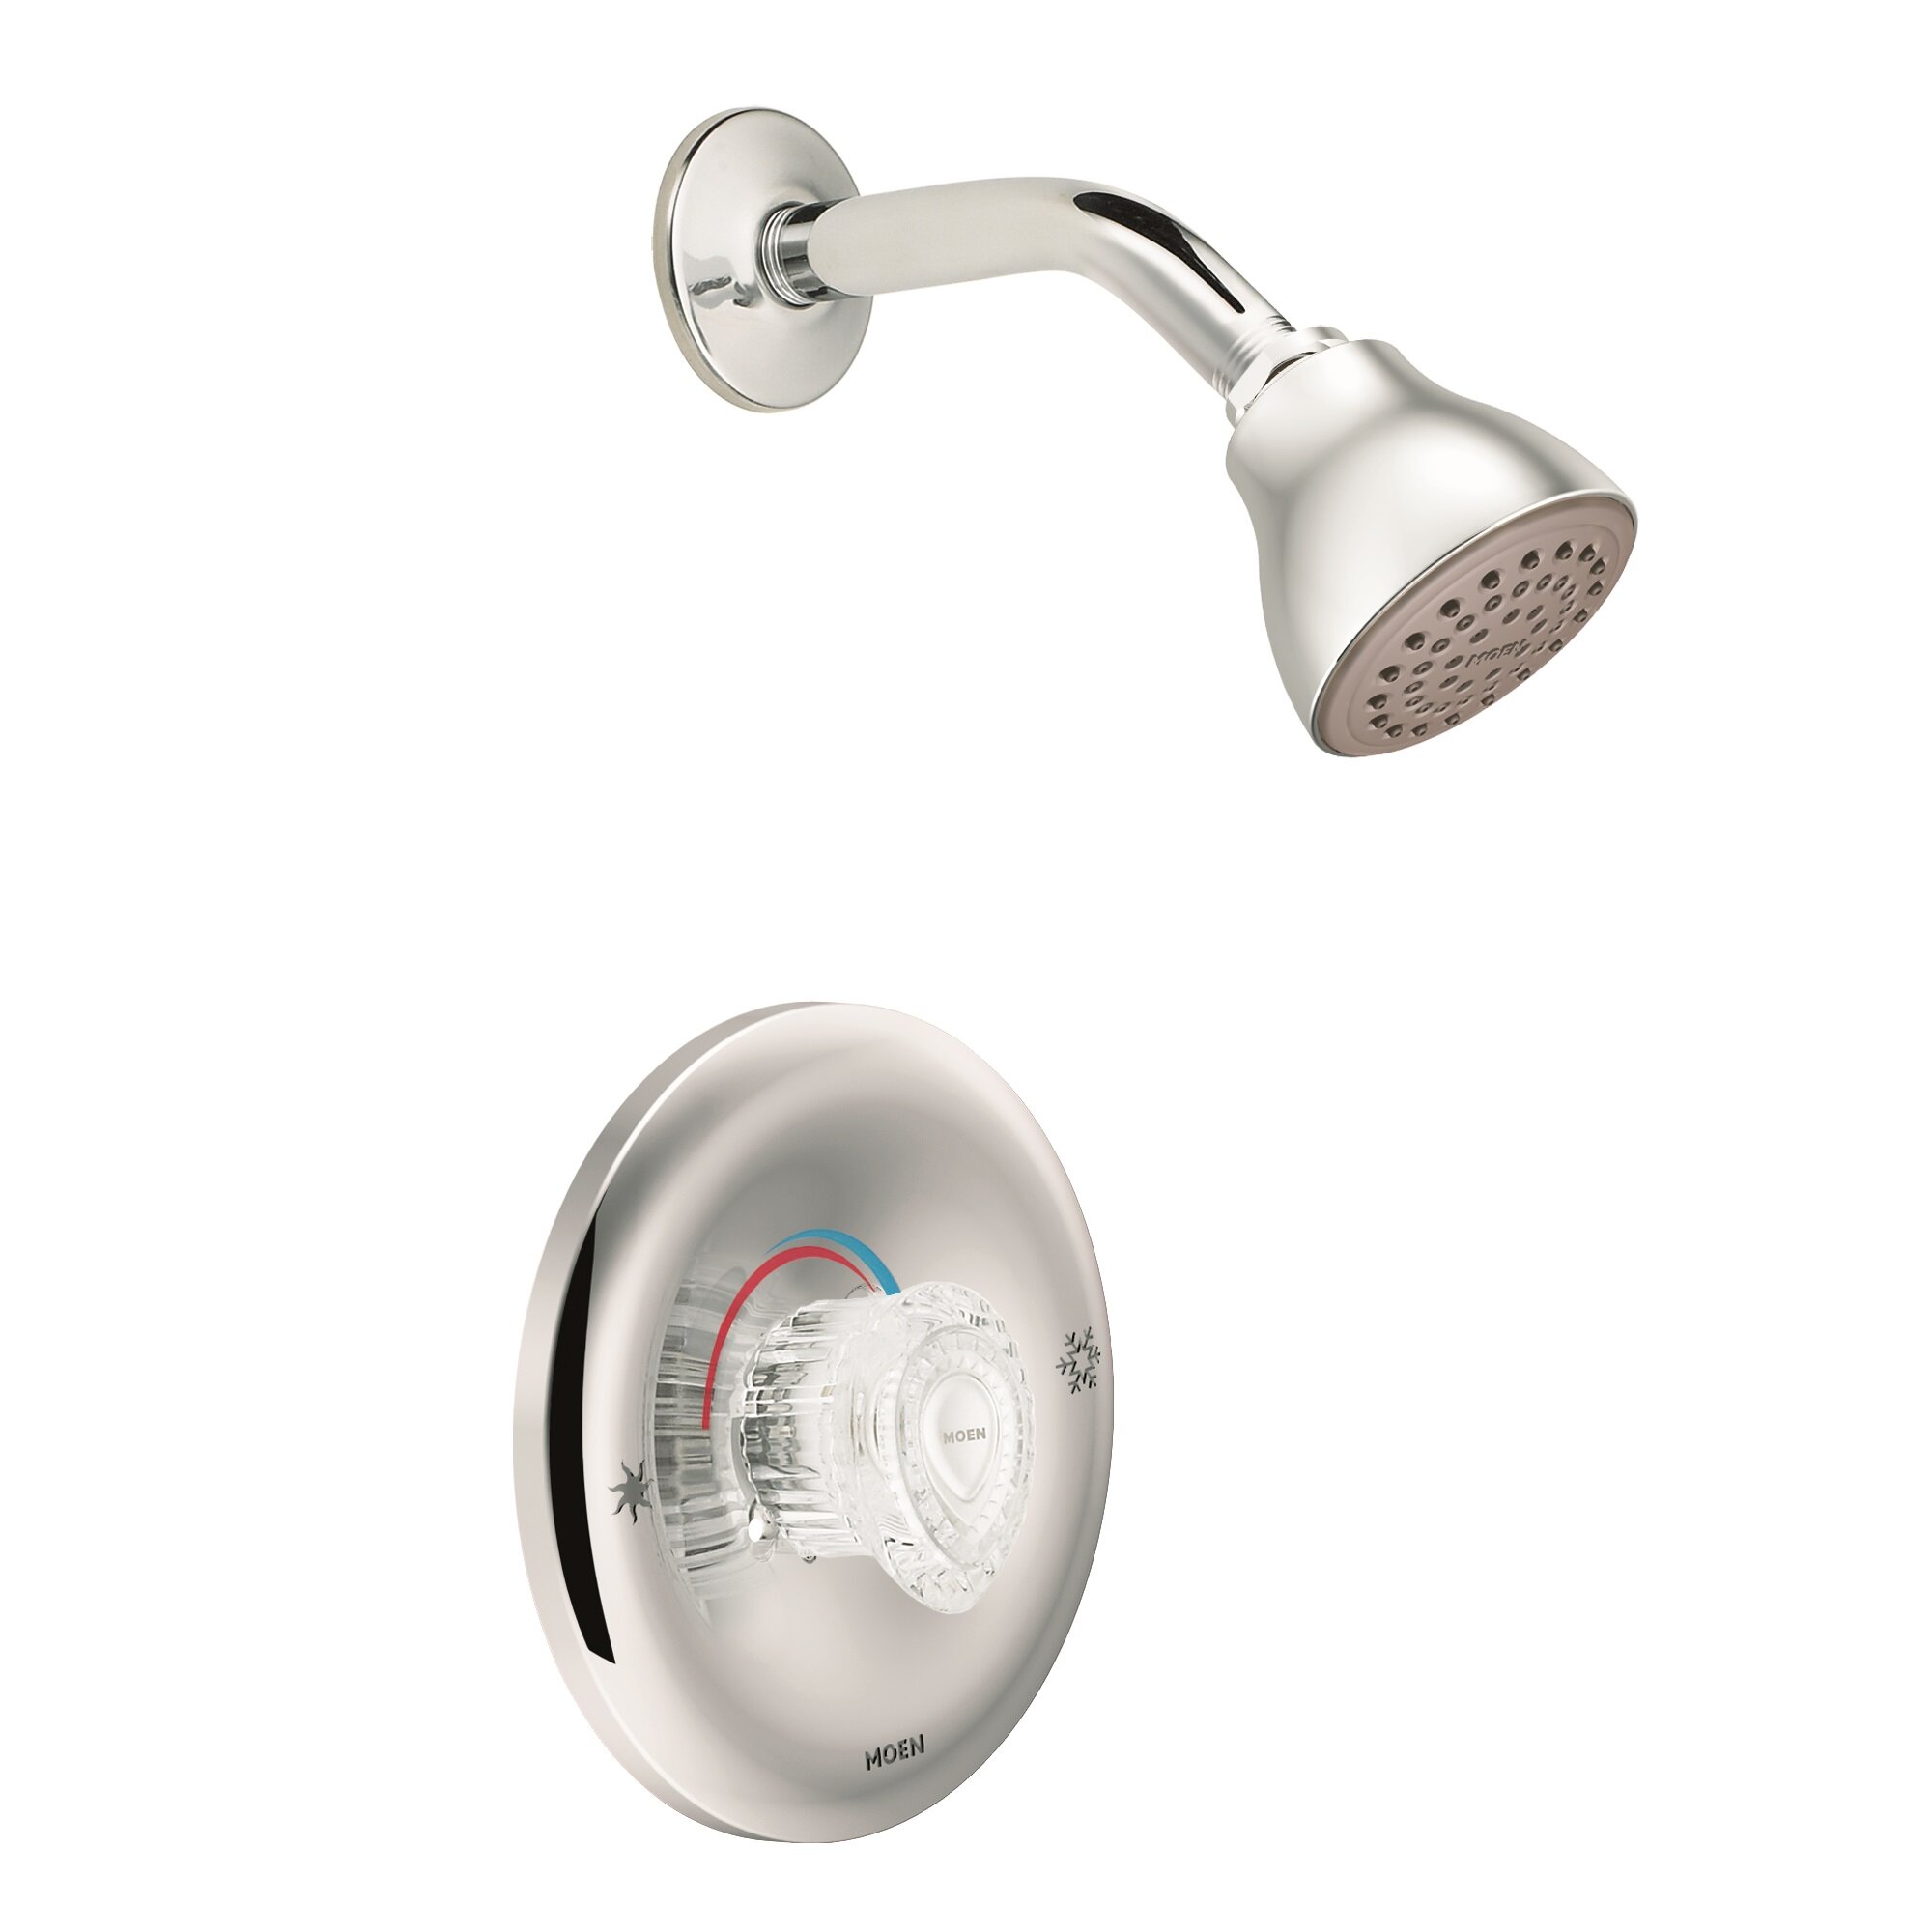 Moen Chateau Dual Control Shower Faucet Trim With Knob Handle And